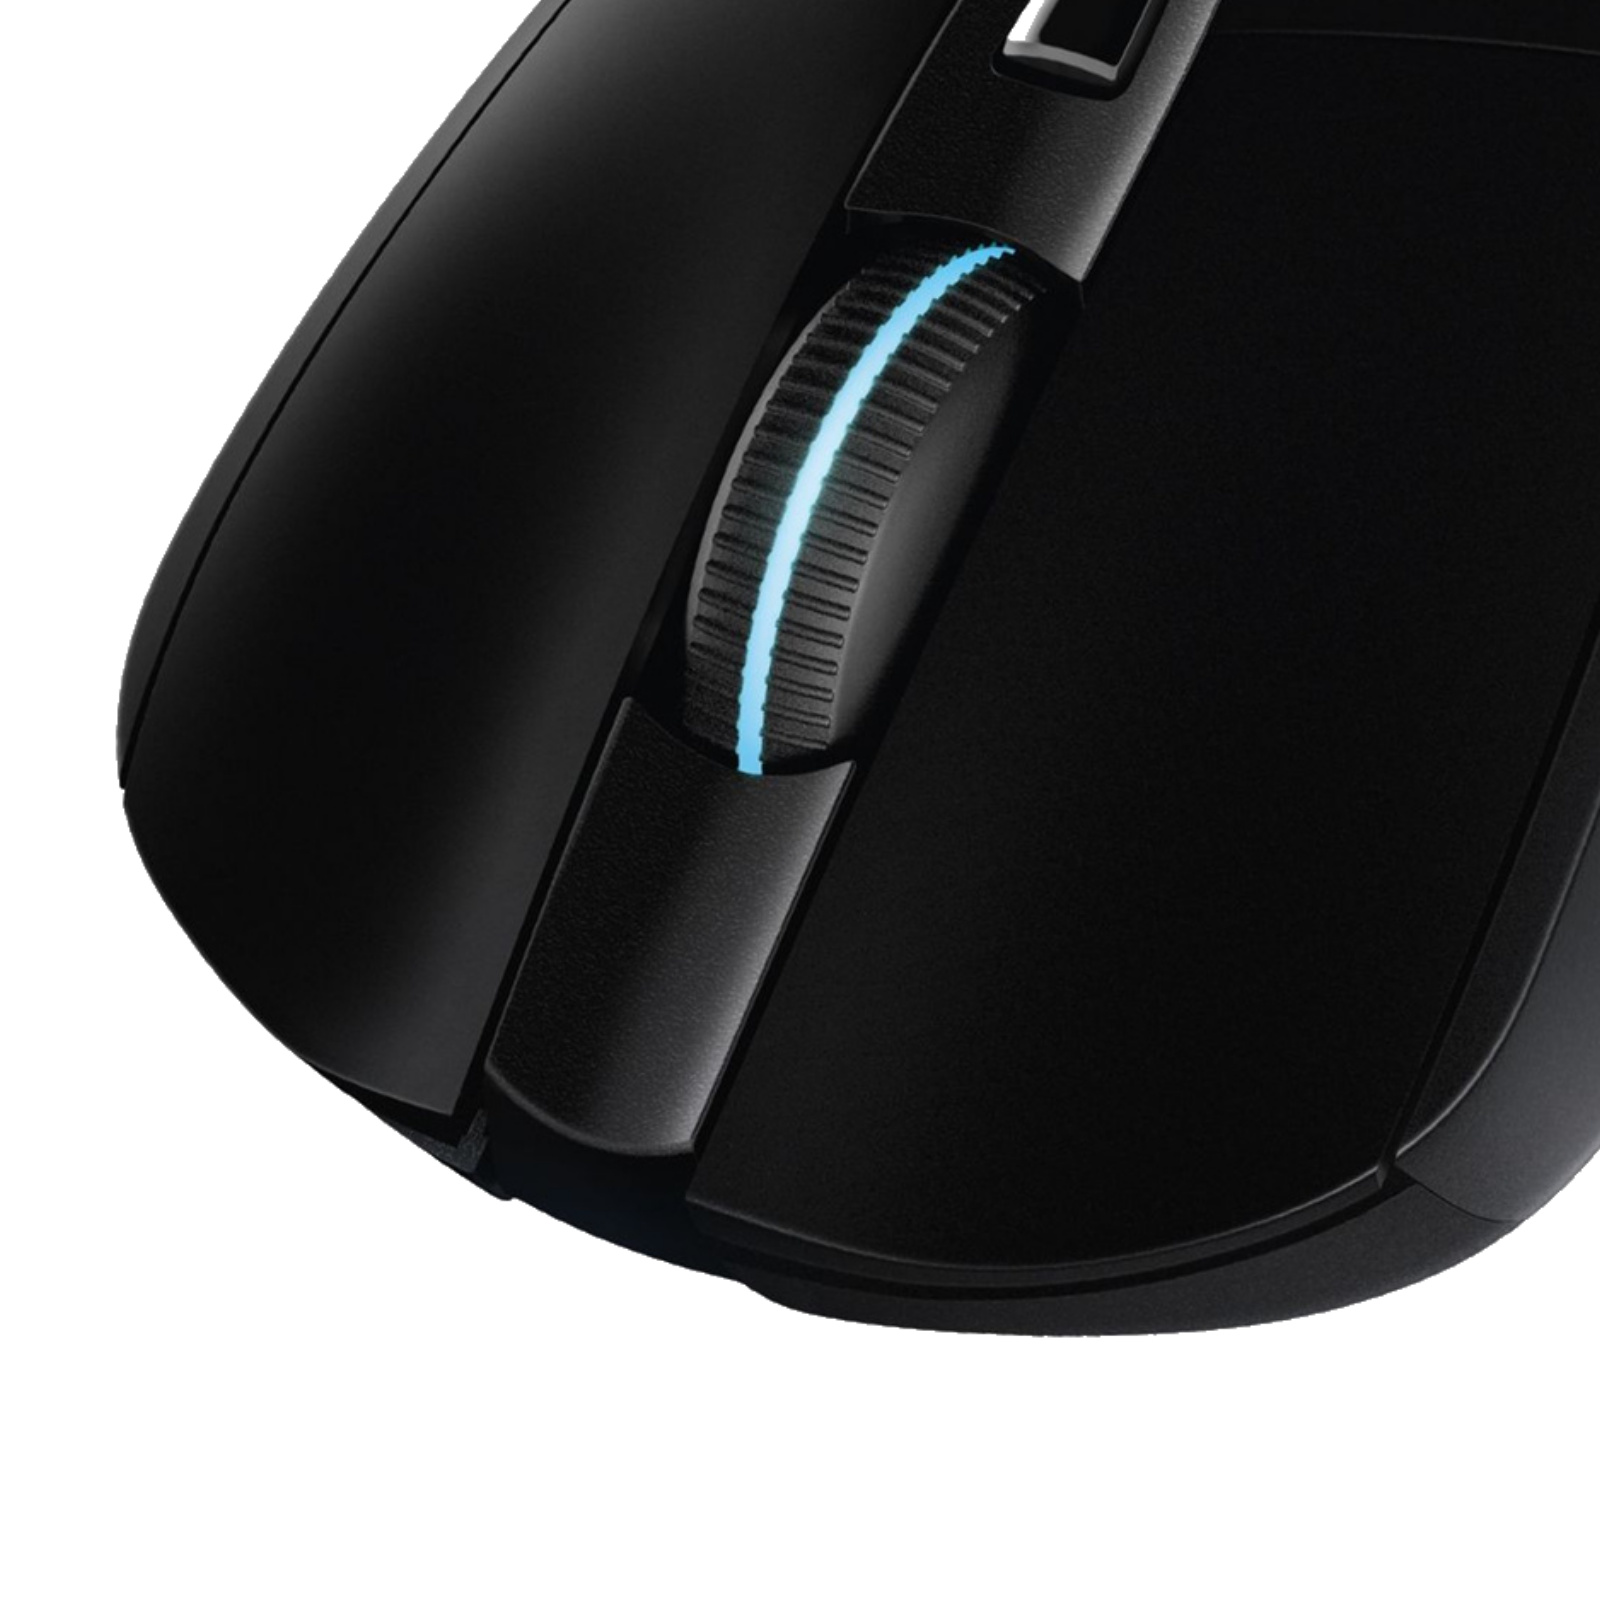 Buy the Logitech G703 Lightspeed RGB Wireless Gaming Mouse with HERO Sensor  ( 910-005642 ) online - PBTech.com